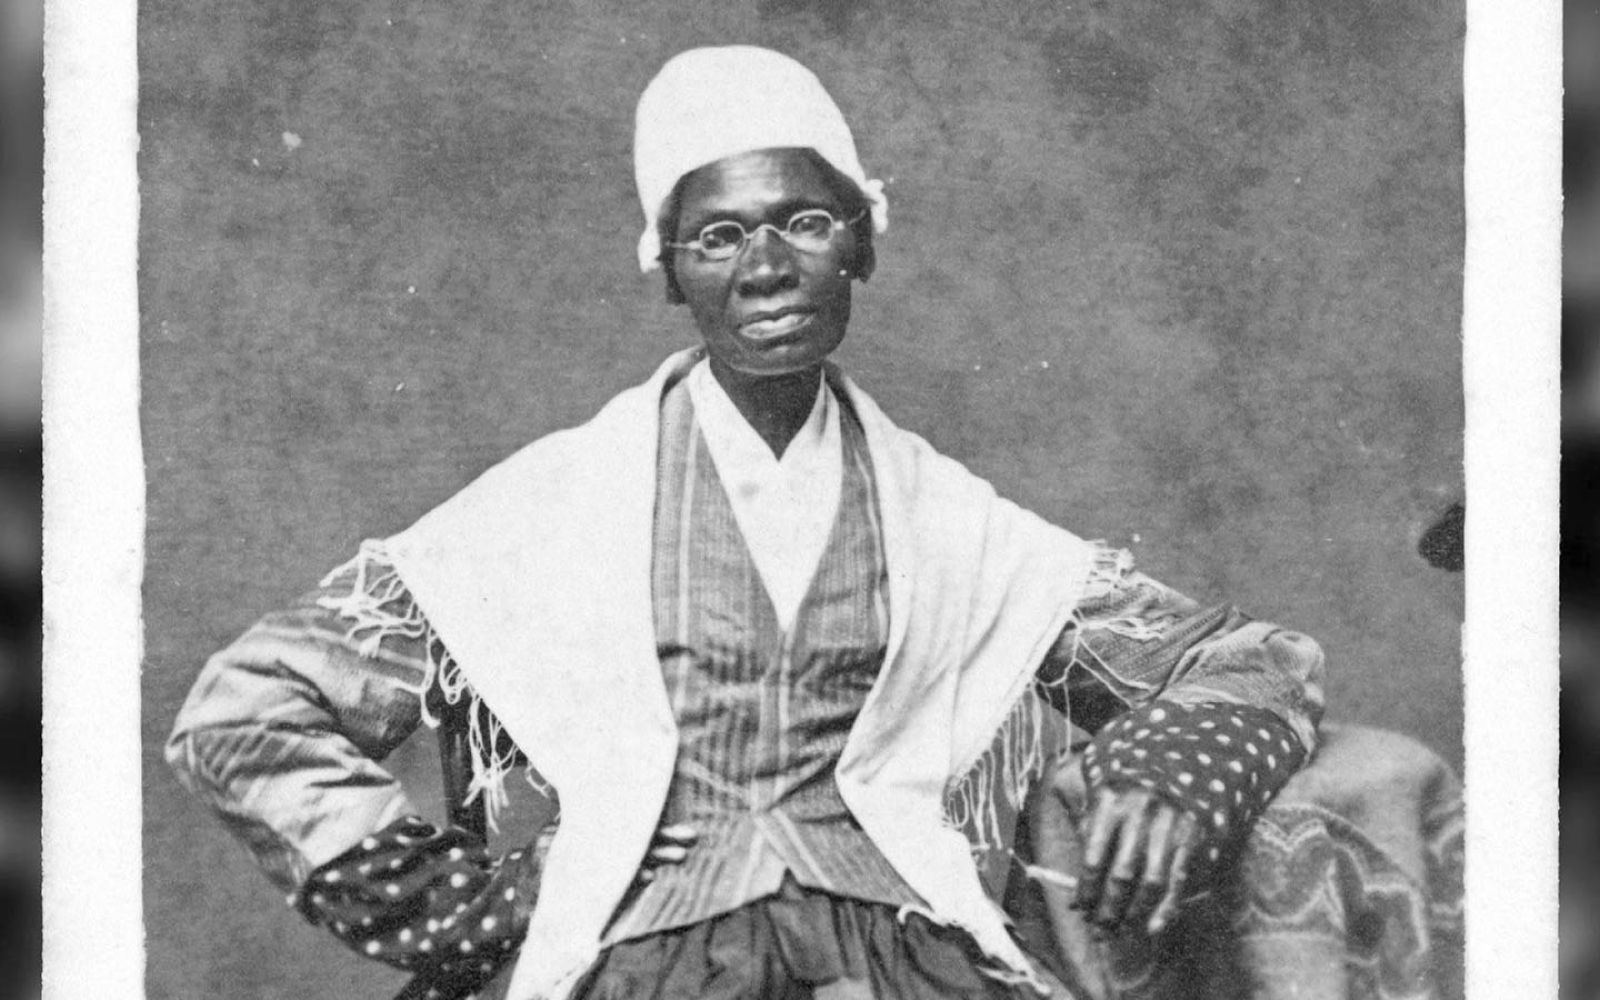 Sojourner Truth's "Ain't I a Woman" is featured in ACPL's Black History Month Exhibit.